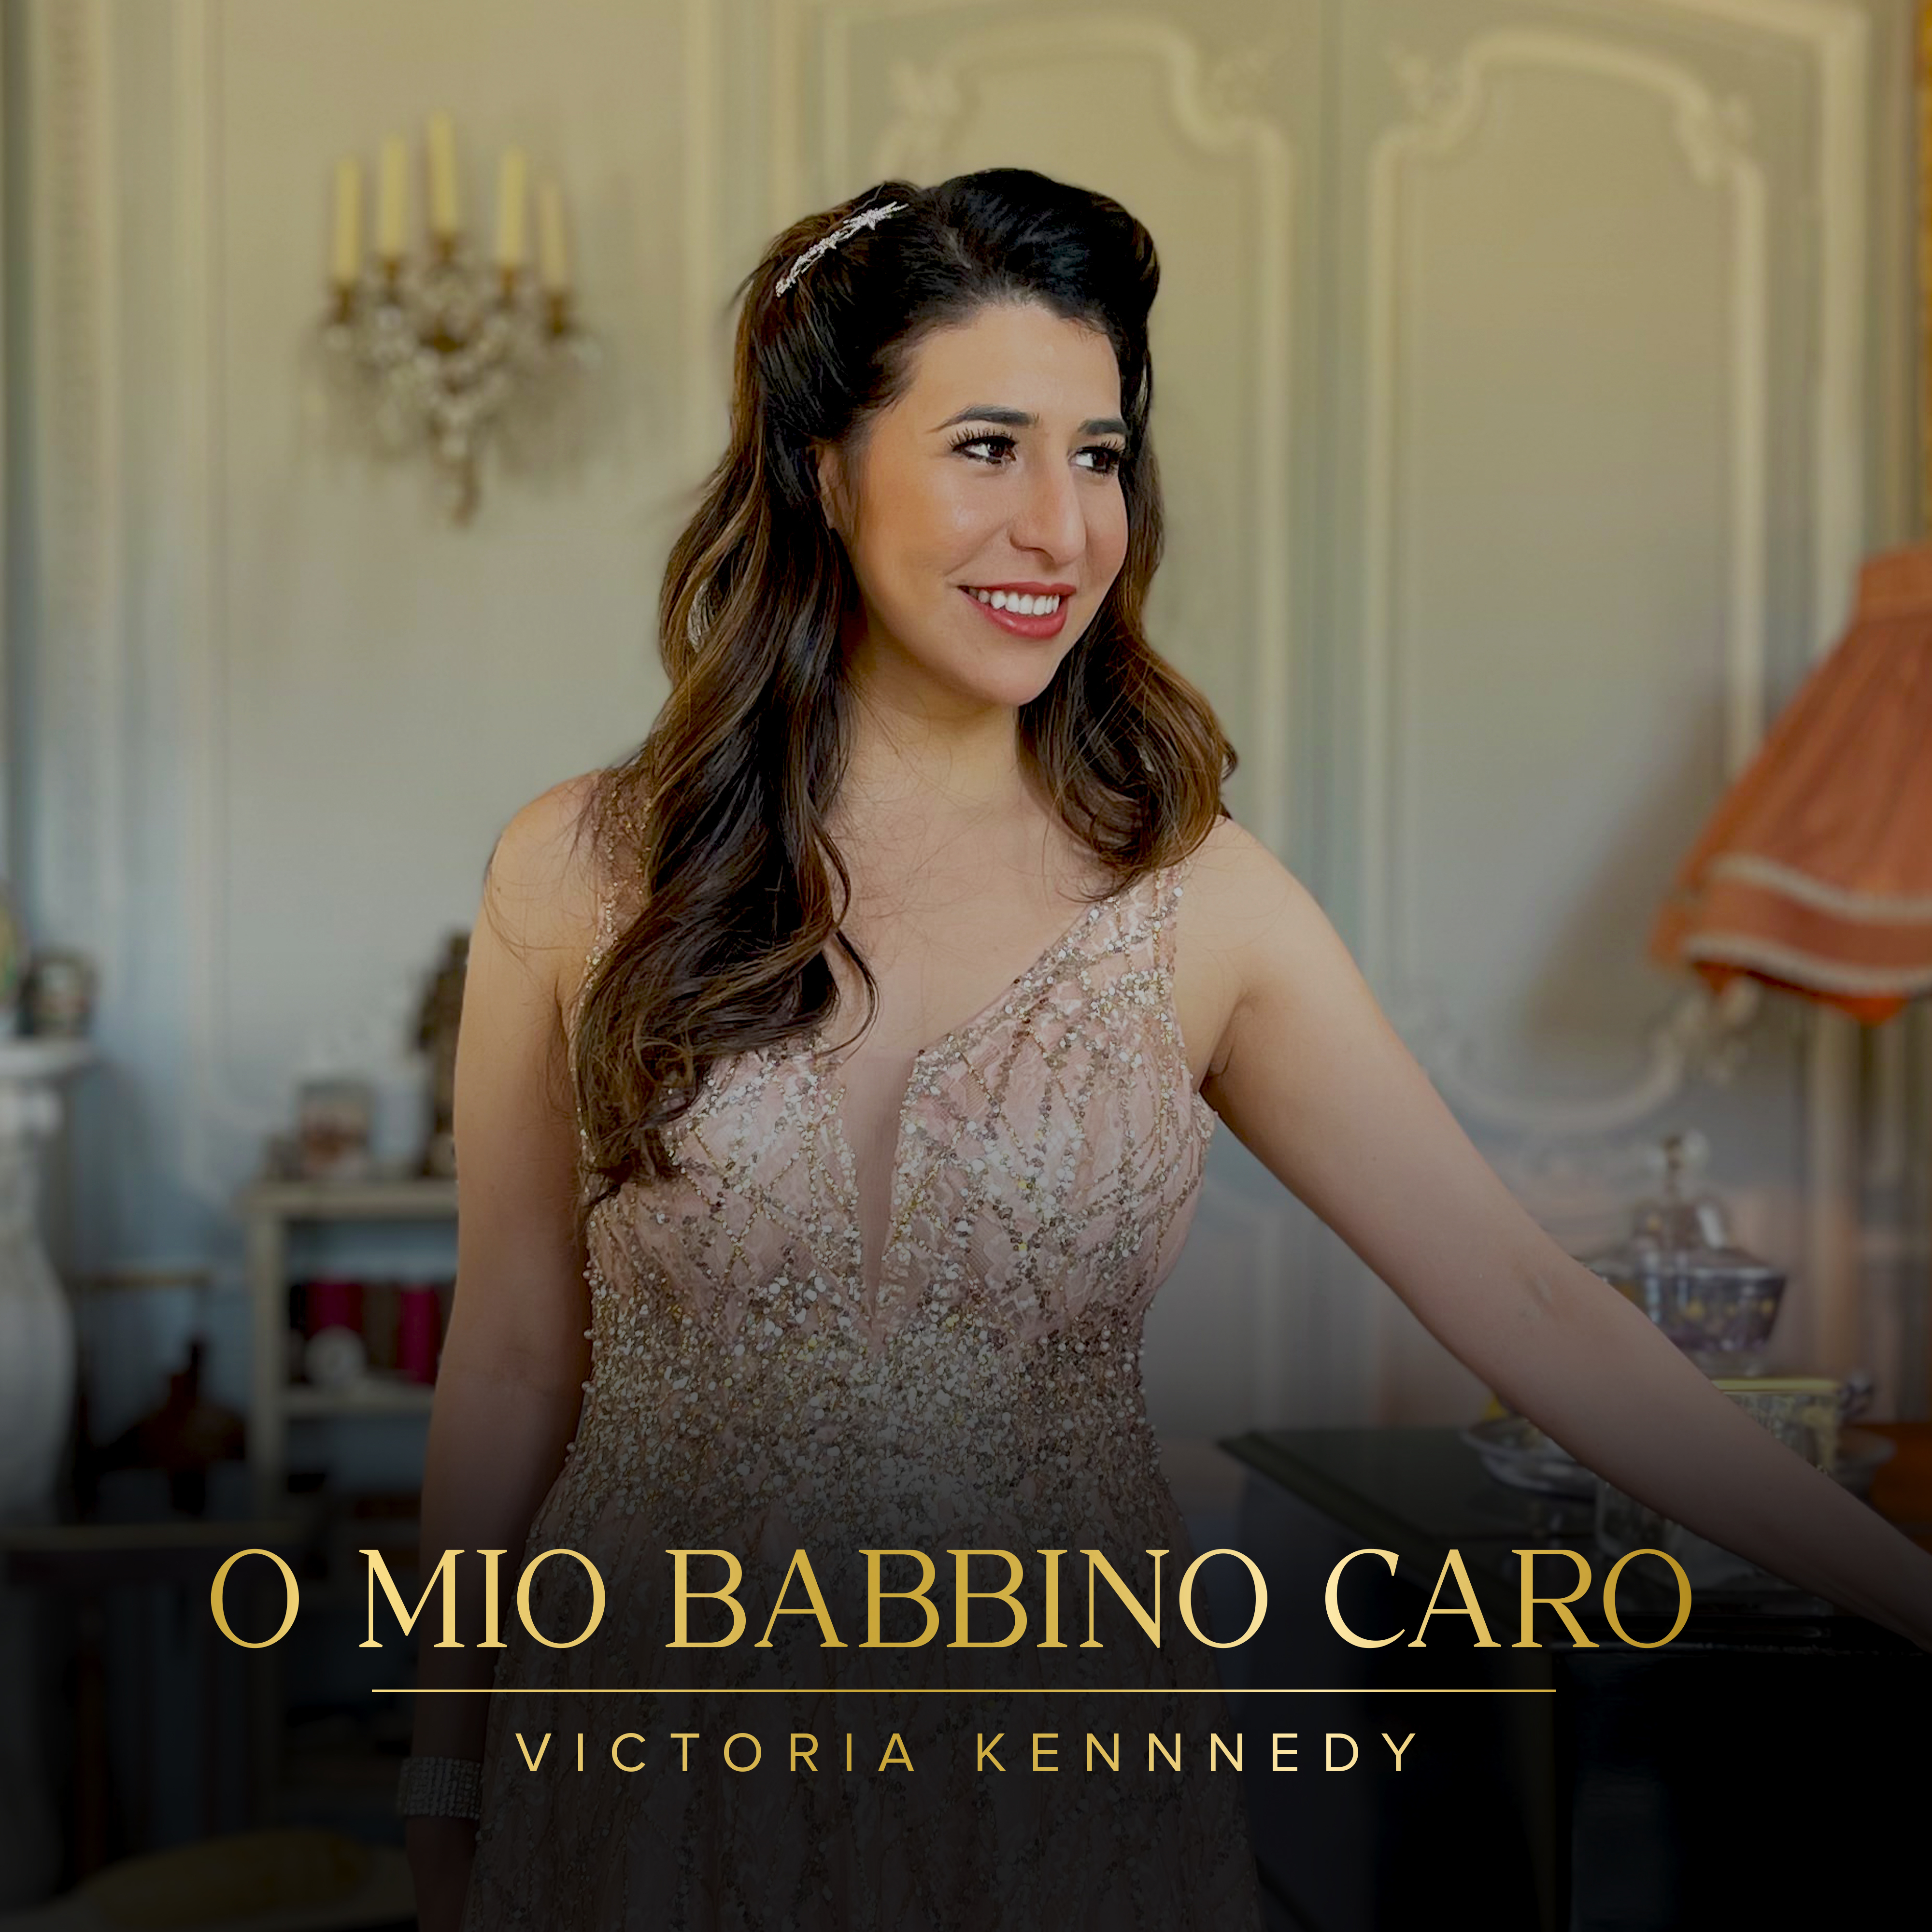 Victorious PR CEO, Victoria Kennedy, Announces New Classical Crossover Single "O Mio Babbino Caro" is #1 in the UK and #3 in USA